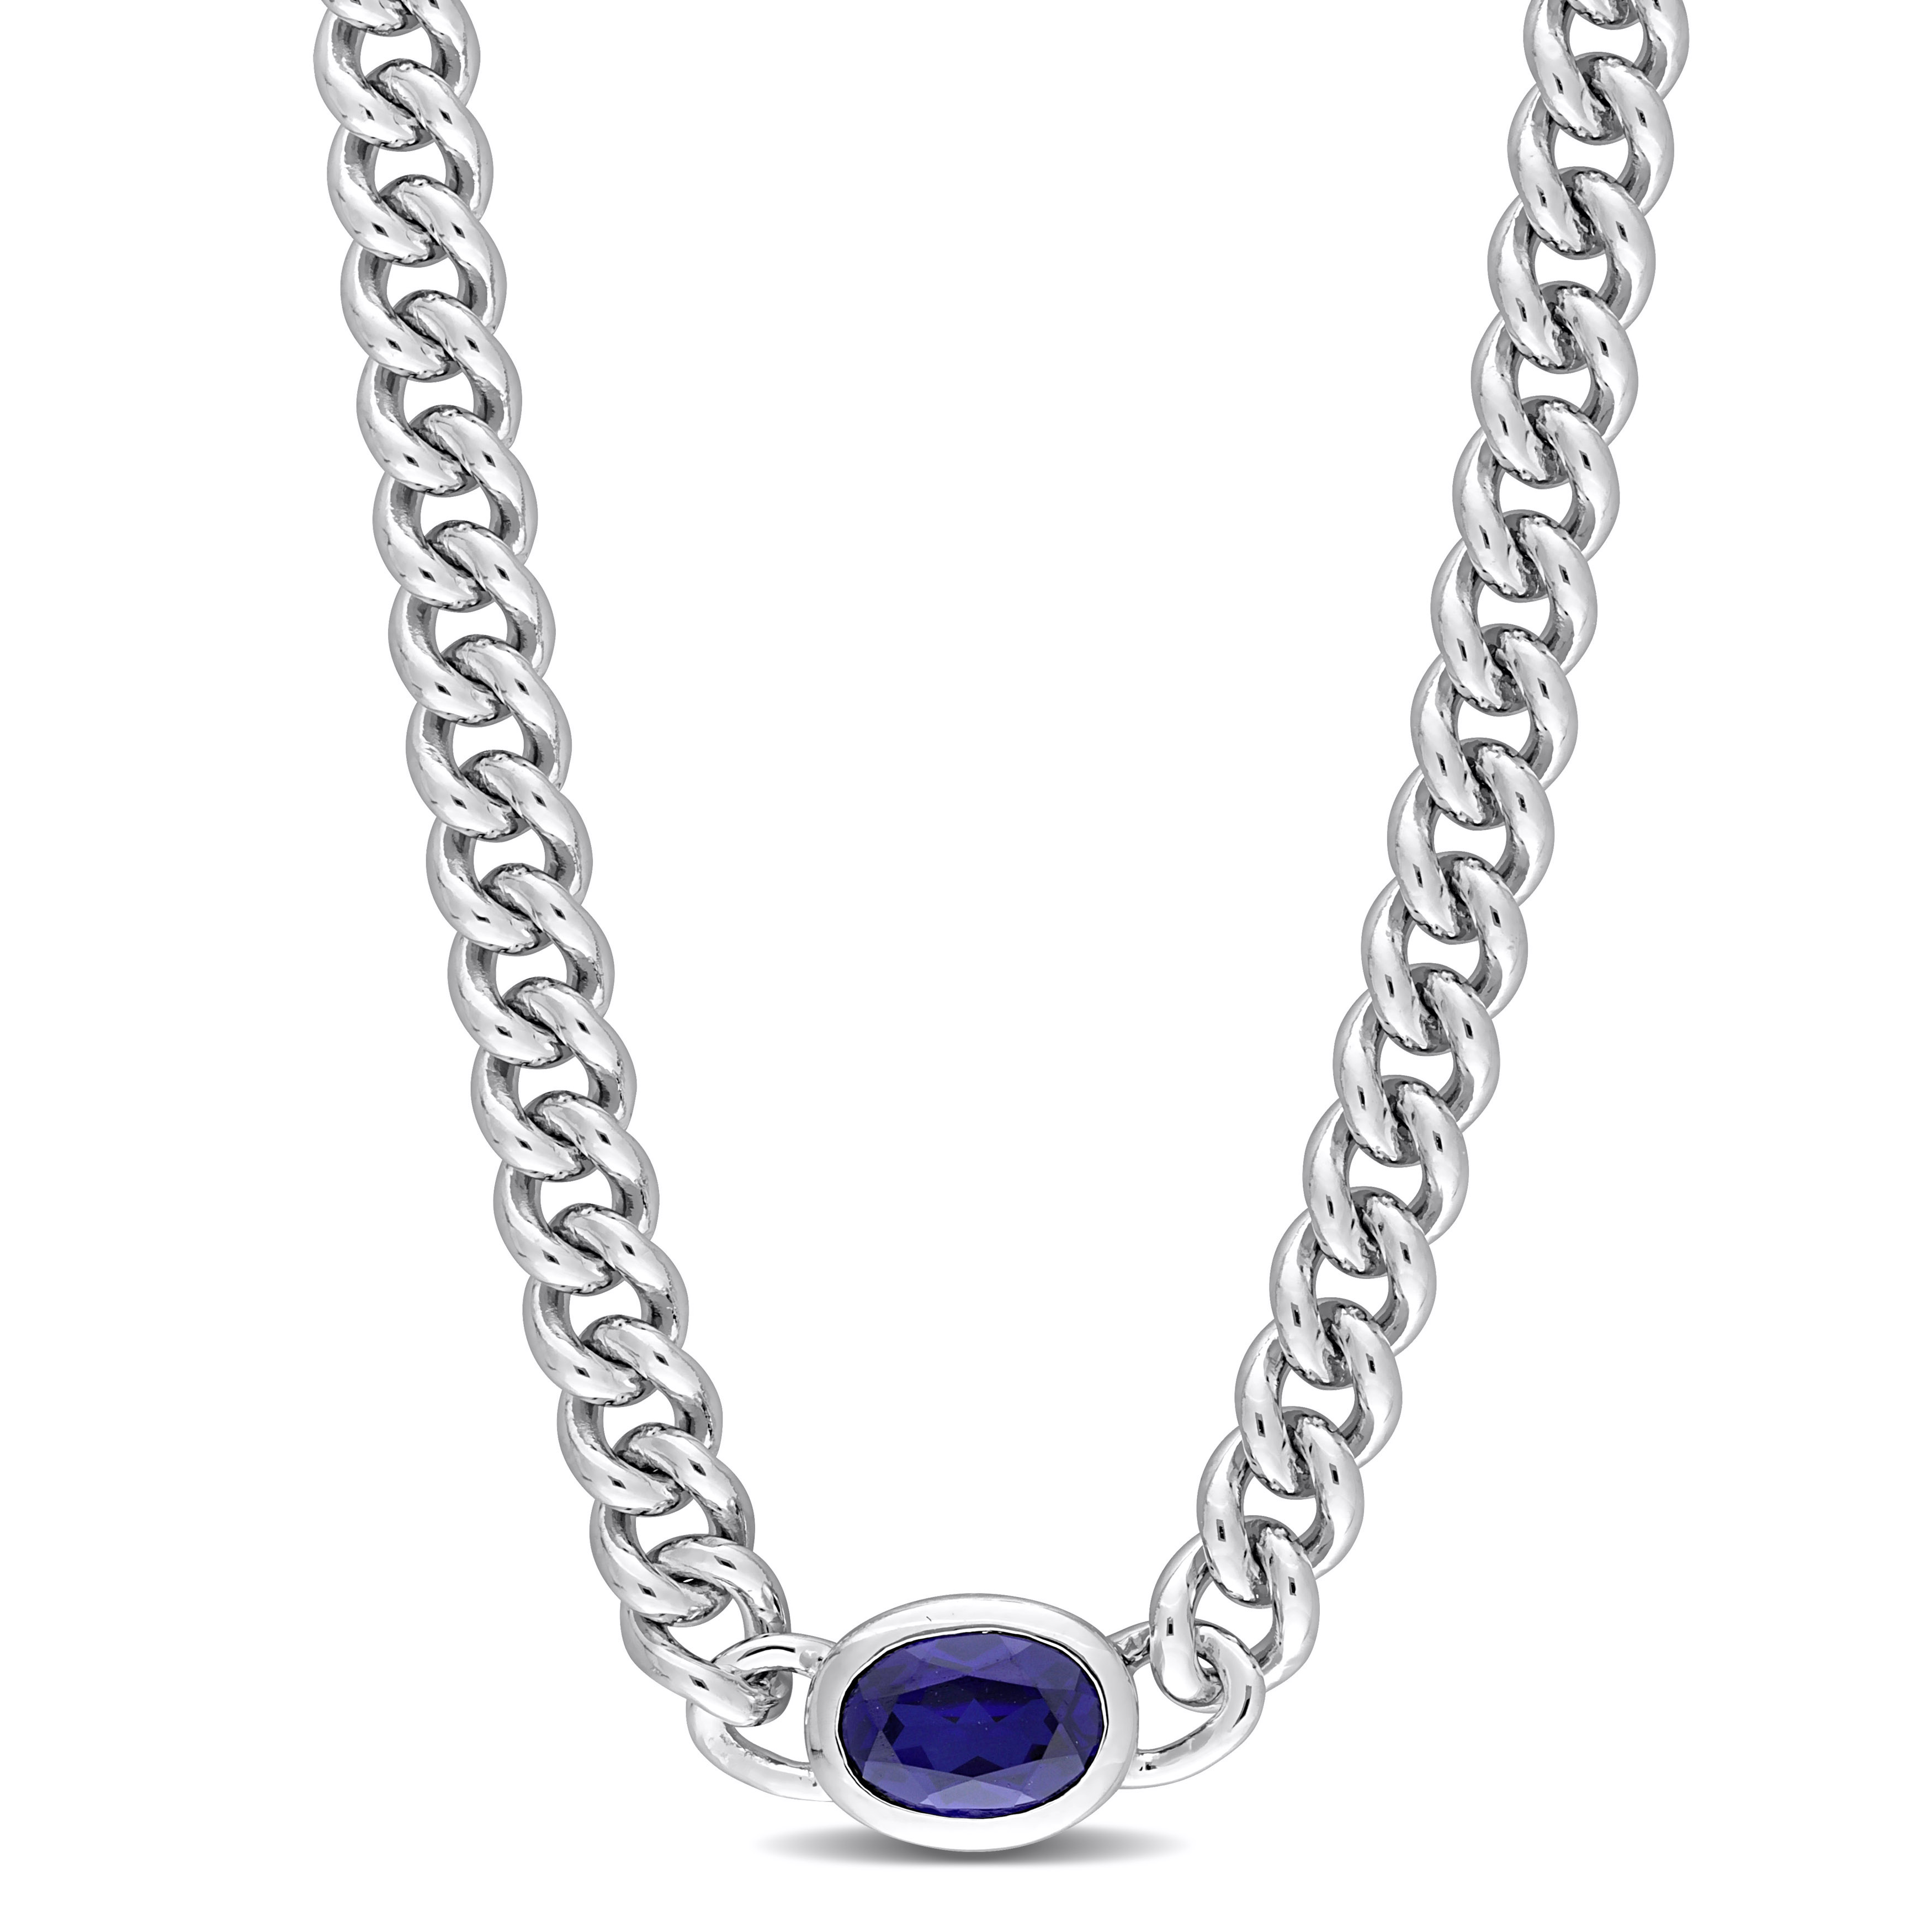 1 1/4 CT TGW Oval Created Blue Sapphire Curb Link Chain Necklace in Sterling Silver - 16 in.